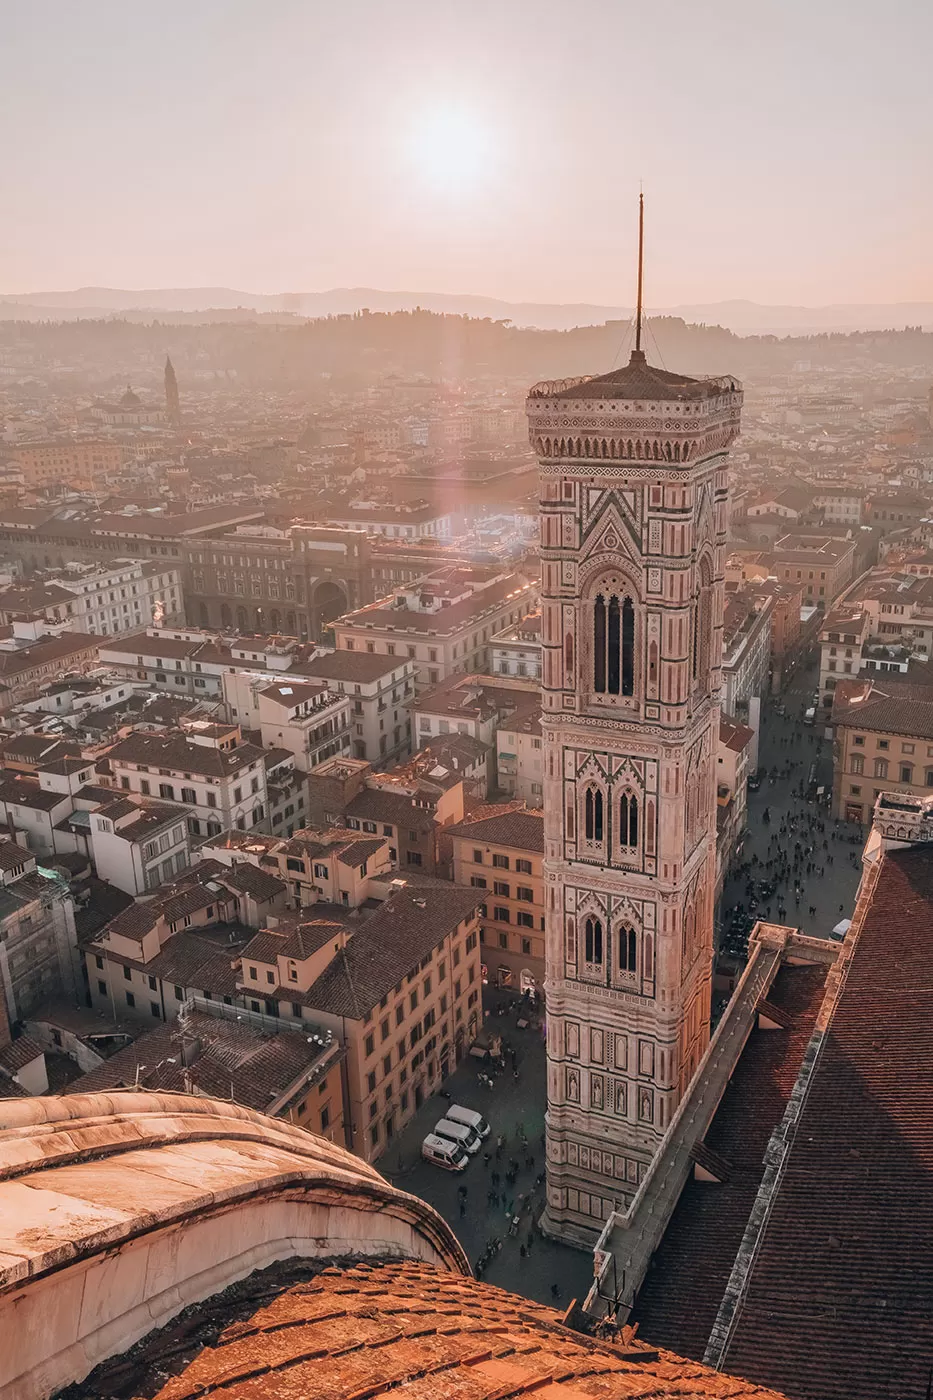 Unique Things to Do in Florence - View from Santa Maria del Fiore of Giotto's Tower at sunset